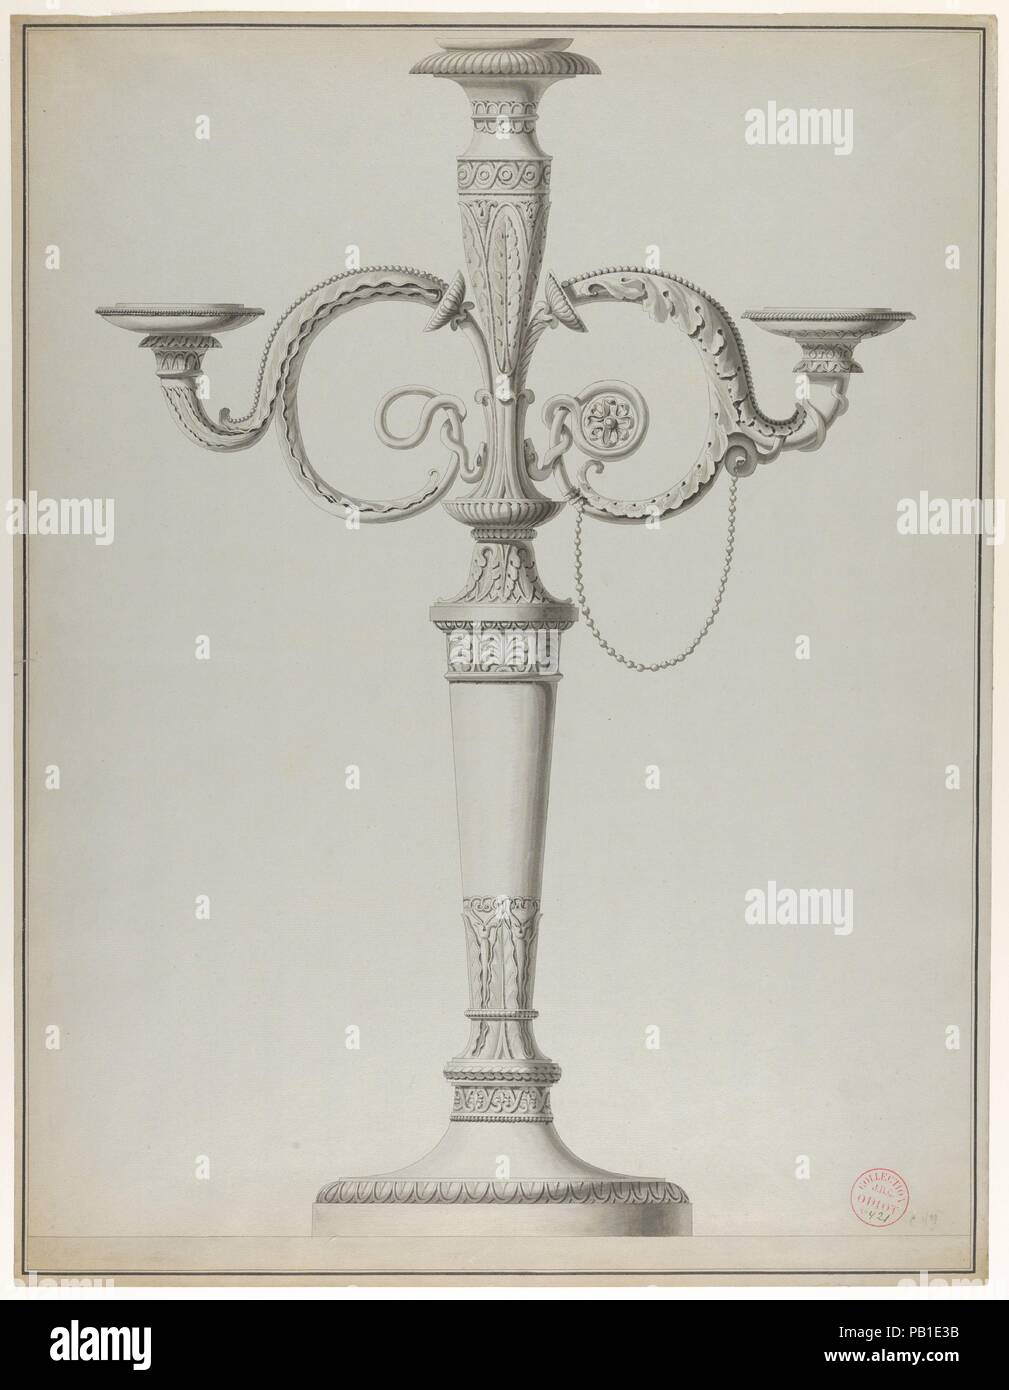 Candelabrum with Alternative Designs for the Arms. Artist: Workshop of Henri Auguste (French, Paris 1759-1816 Port-au-Prince); After a Design by Jean Guillaume Moitte (French, Paris 1746-1810 Paris). Dimensions: 25 1/16 x 19 1/2 in.  (63.7 x 49.5 cm). Date: ca. 1770-1800. Museum: Metropolitan Museum of Art, New York, USA. Stock Photo